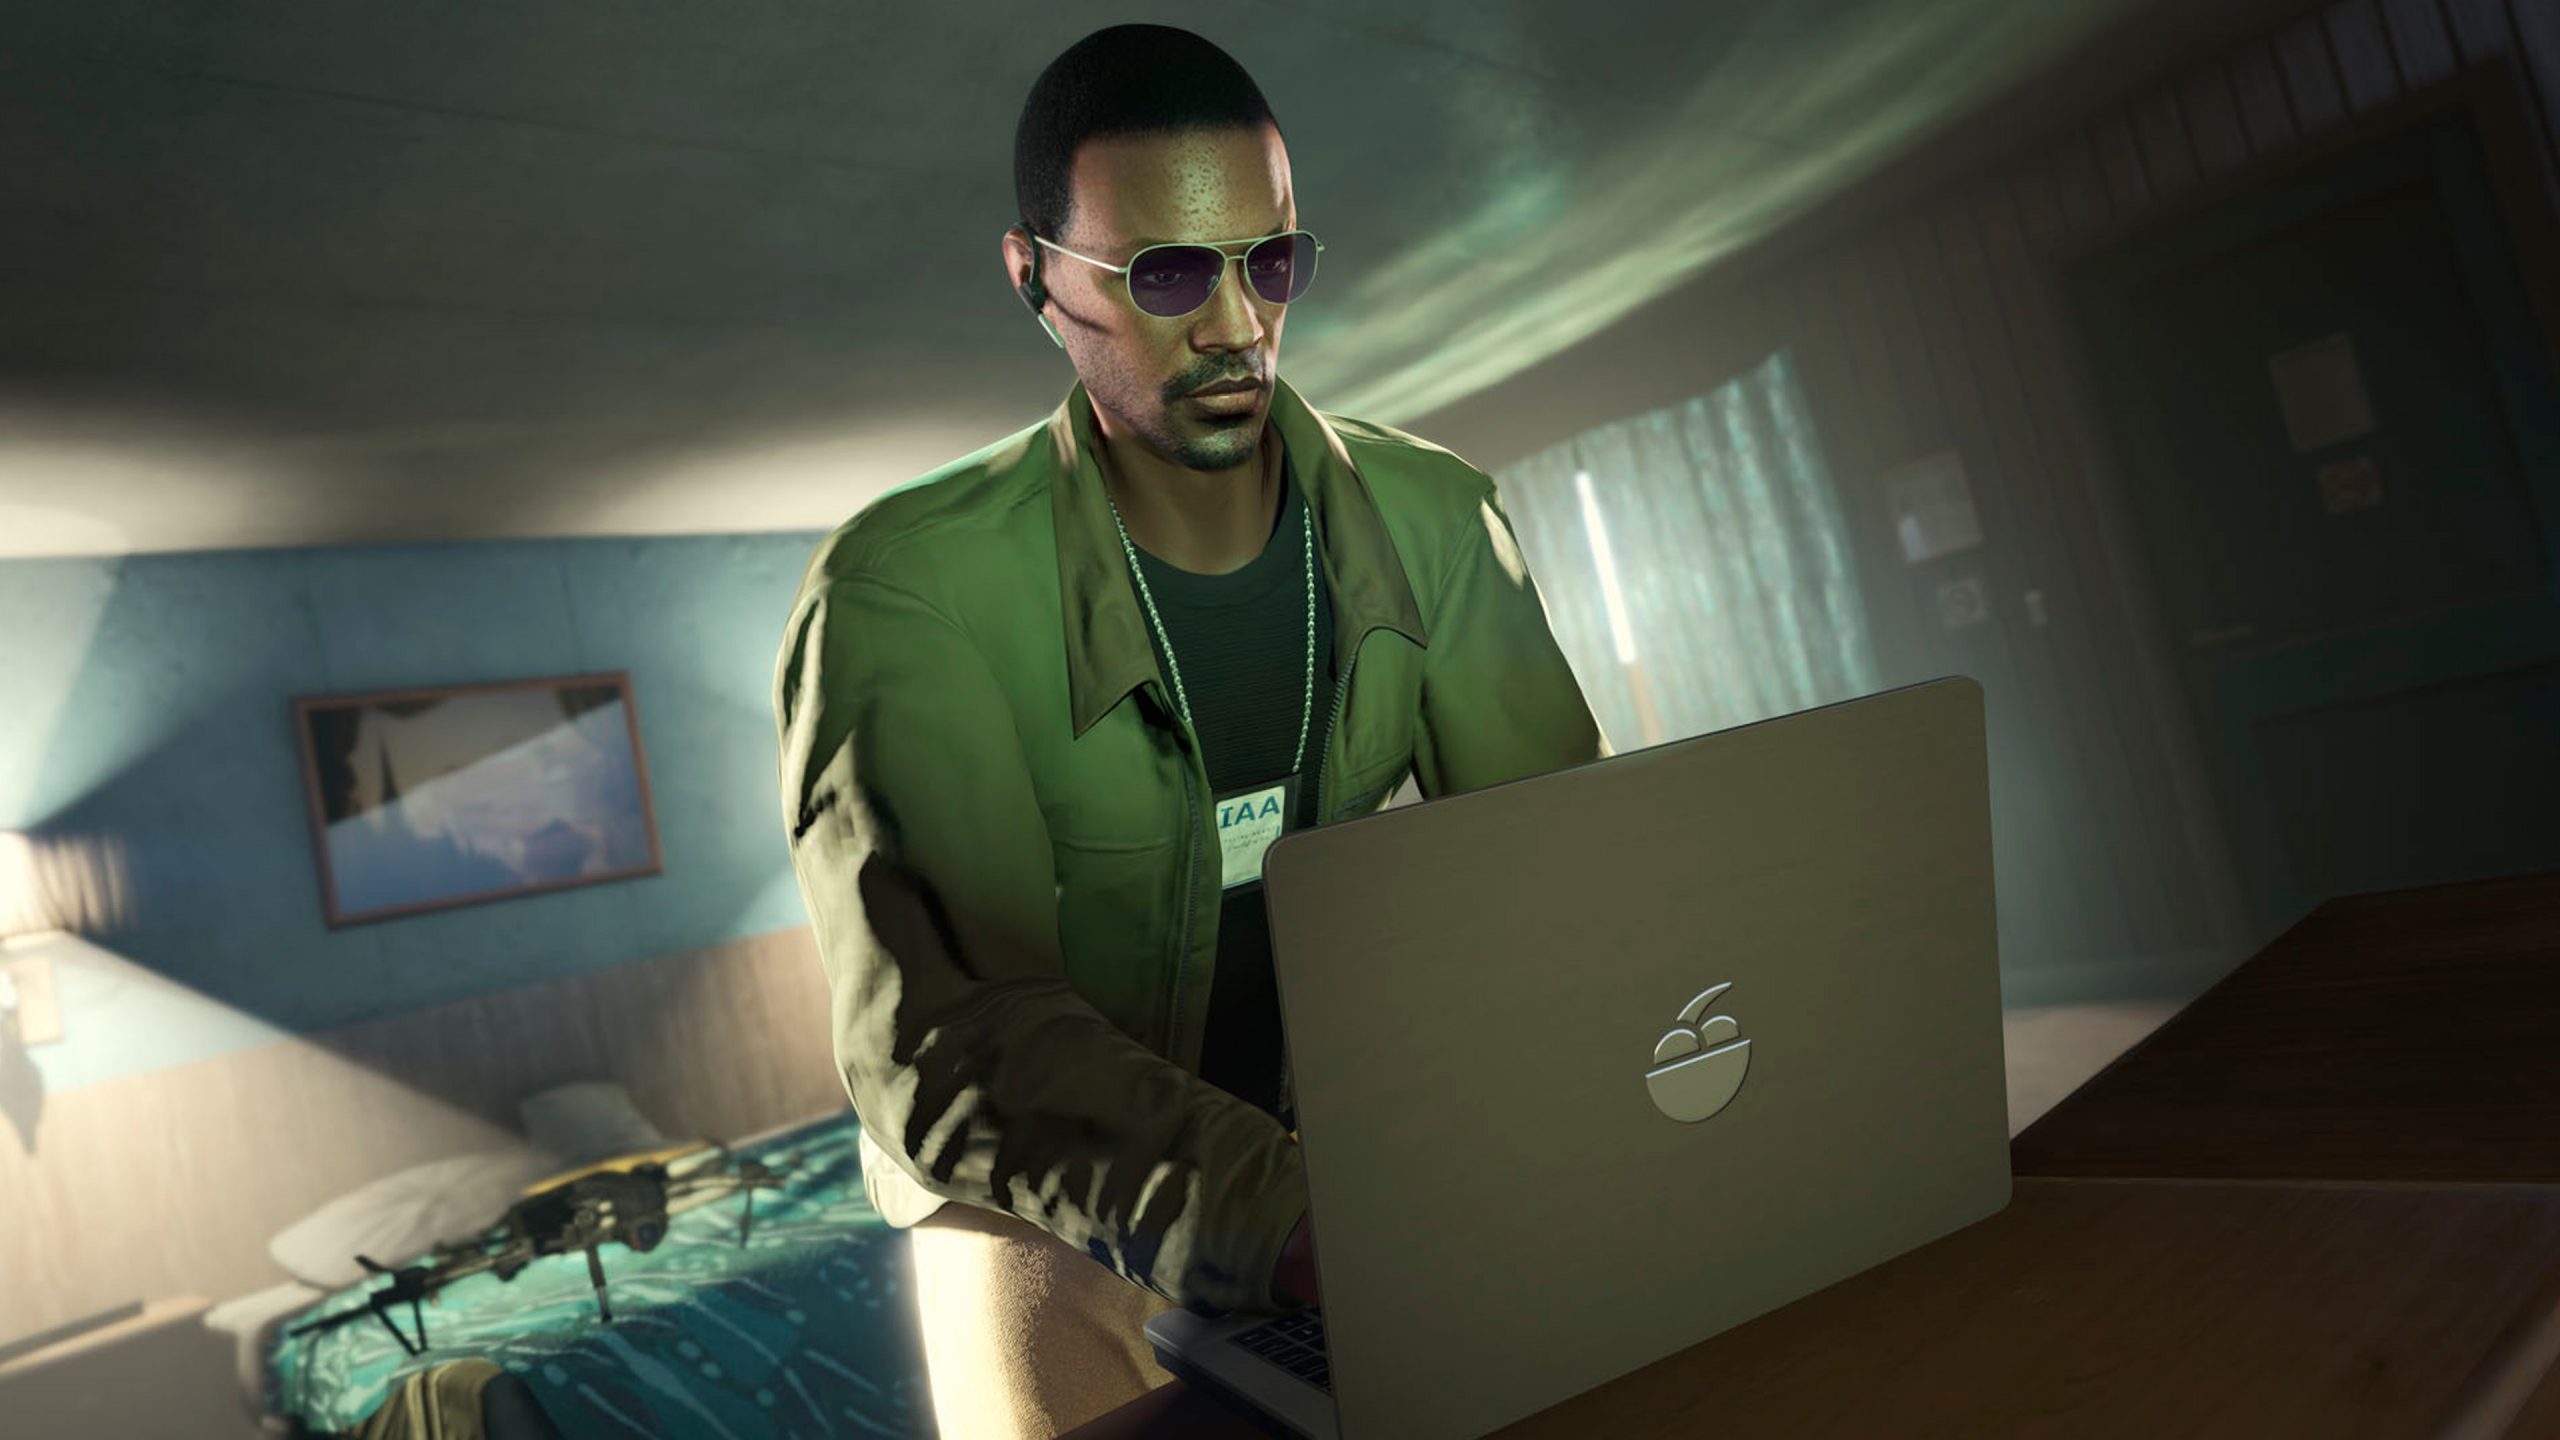 GTA 6 Leak Unveils Unconventional Hacking Method: Teenage Hacker's  Surprising Approach Revealed. Gaming news - eSports events review,  analytics, announcements, interviews, statistics - fUA8xZtmX